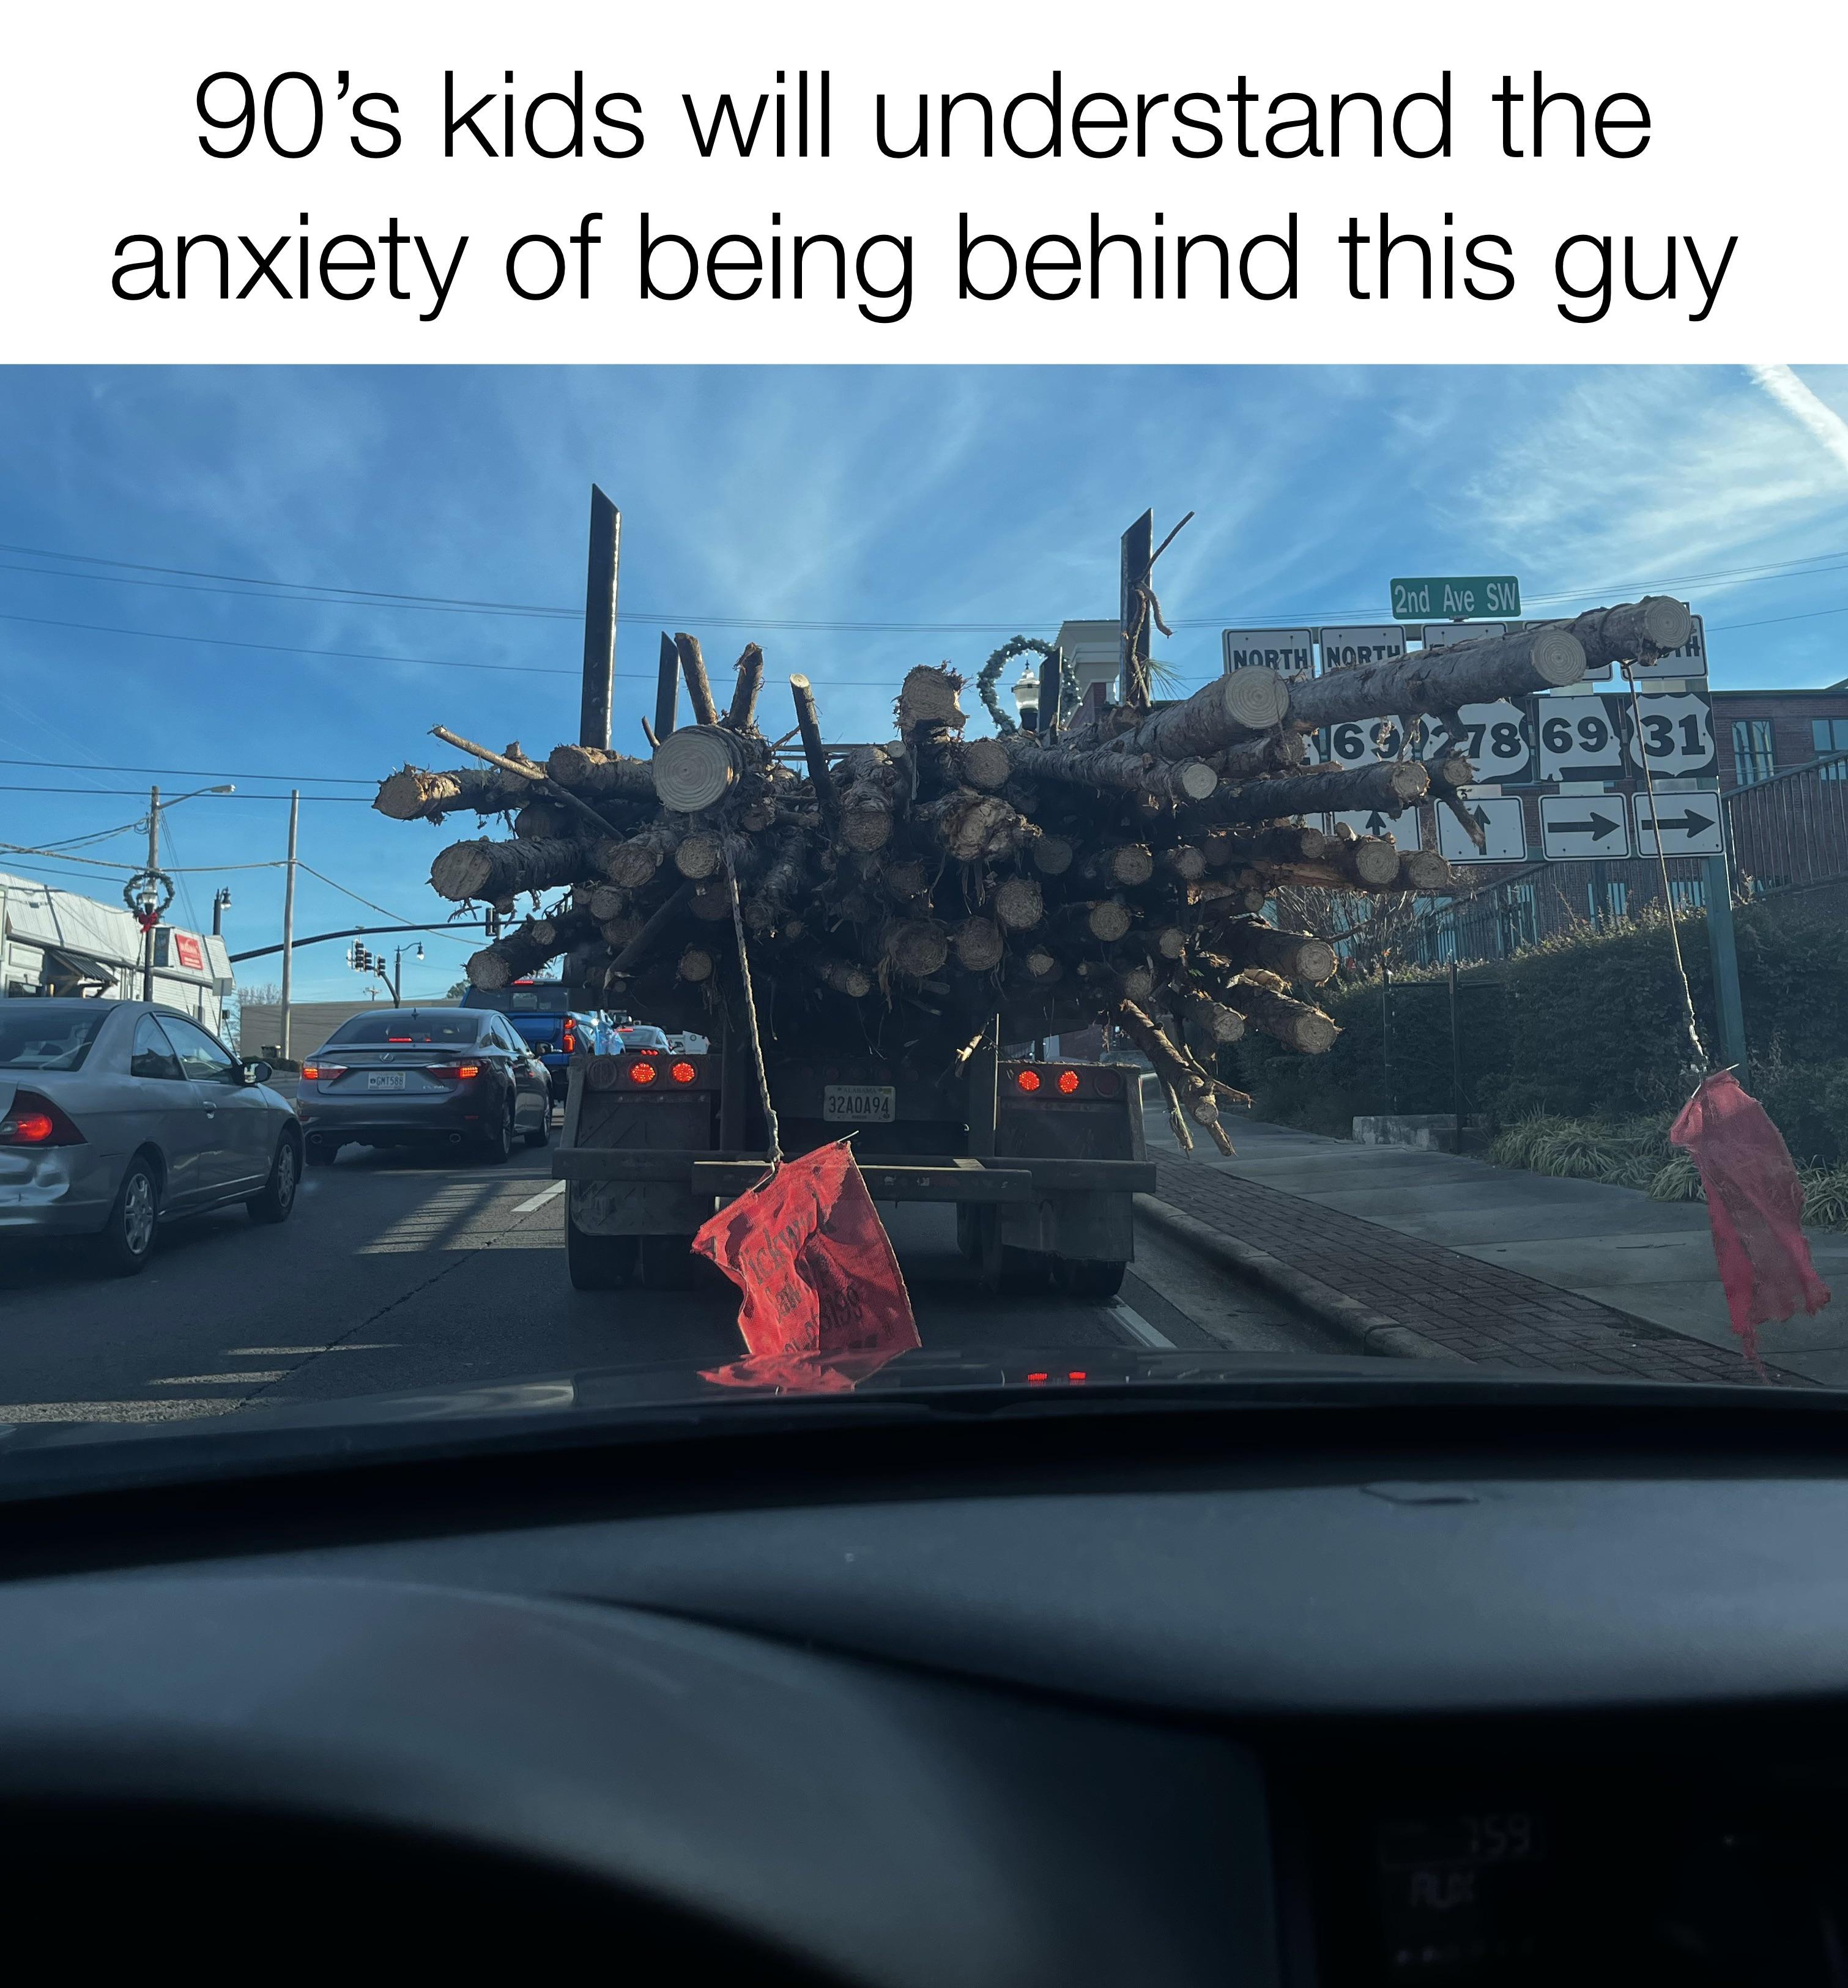 funny friday memes -  road - 90's kids will understand the anxiety of being behind this guy 164778 69 31 Ne